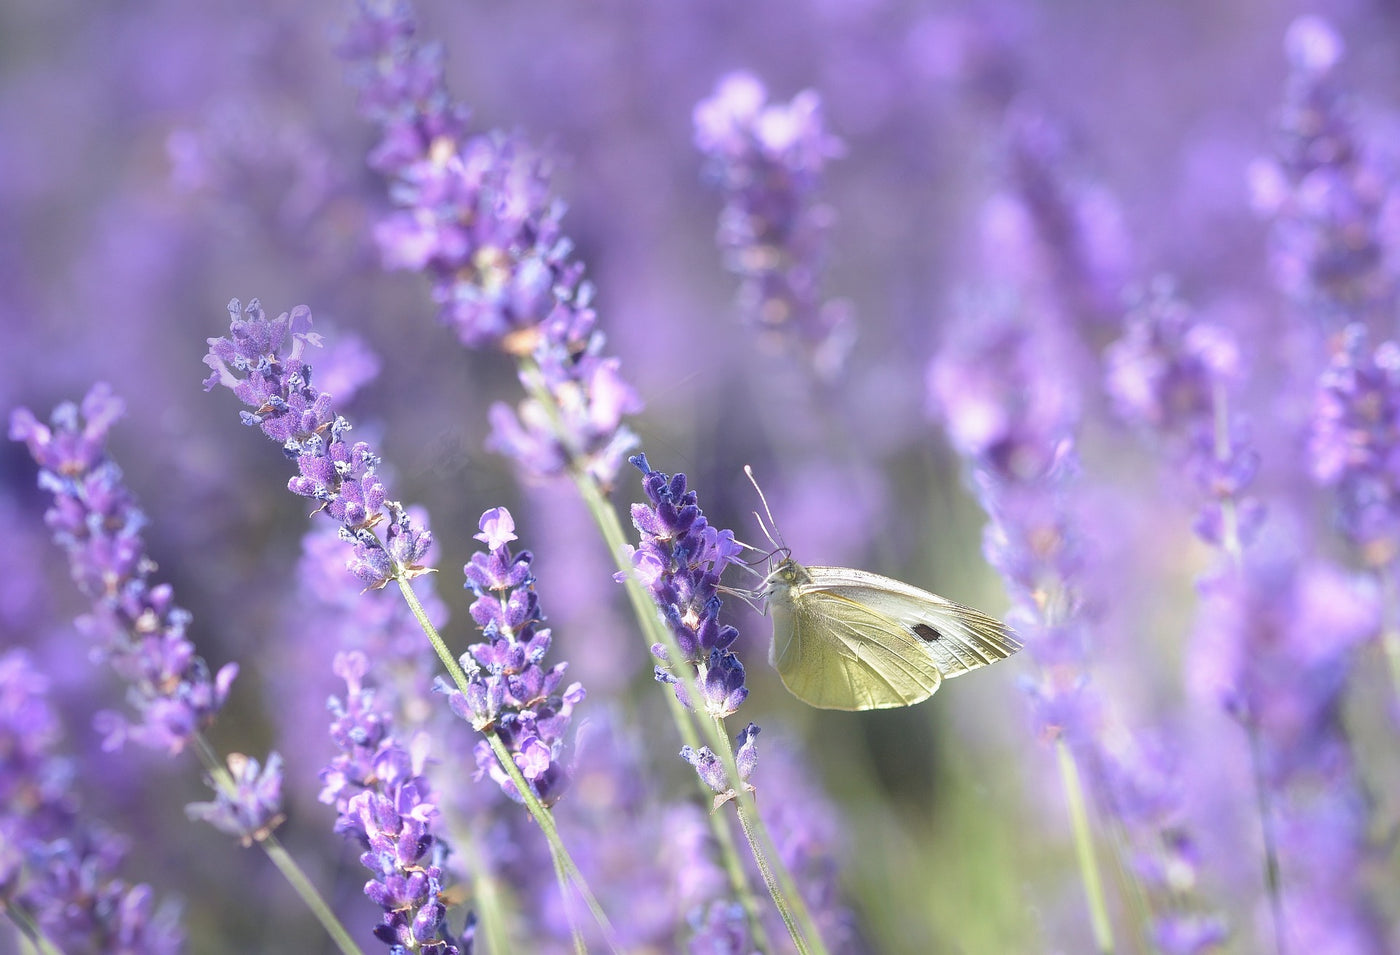 A Visit to the Lavender Fields